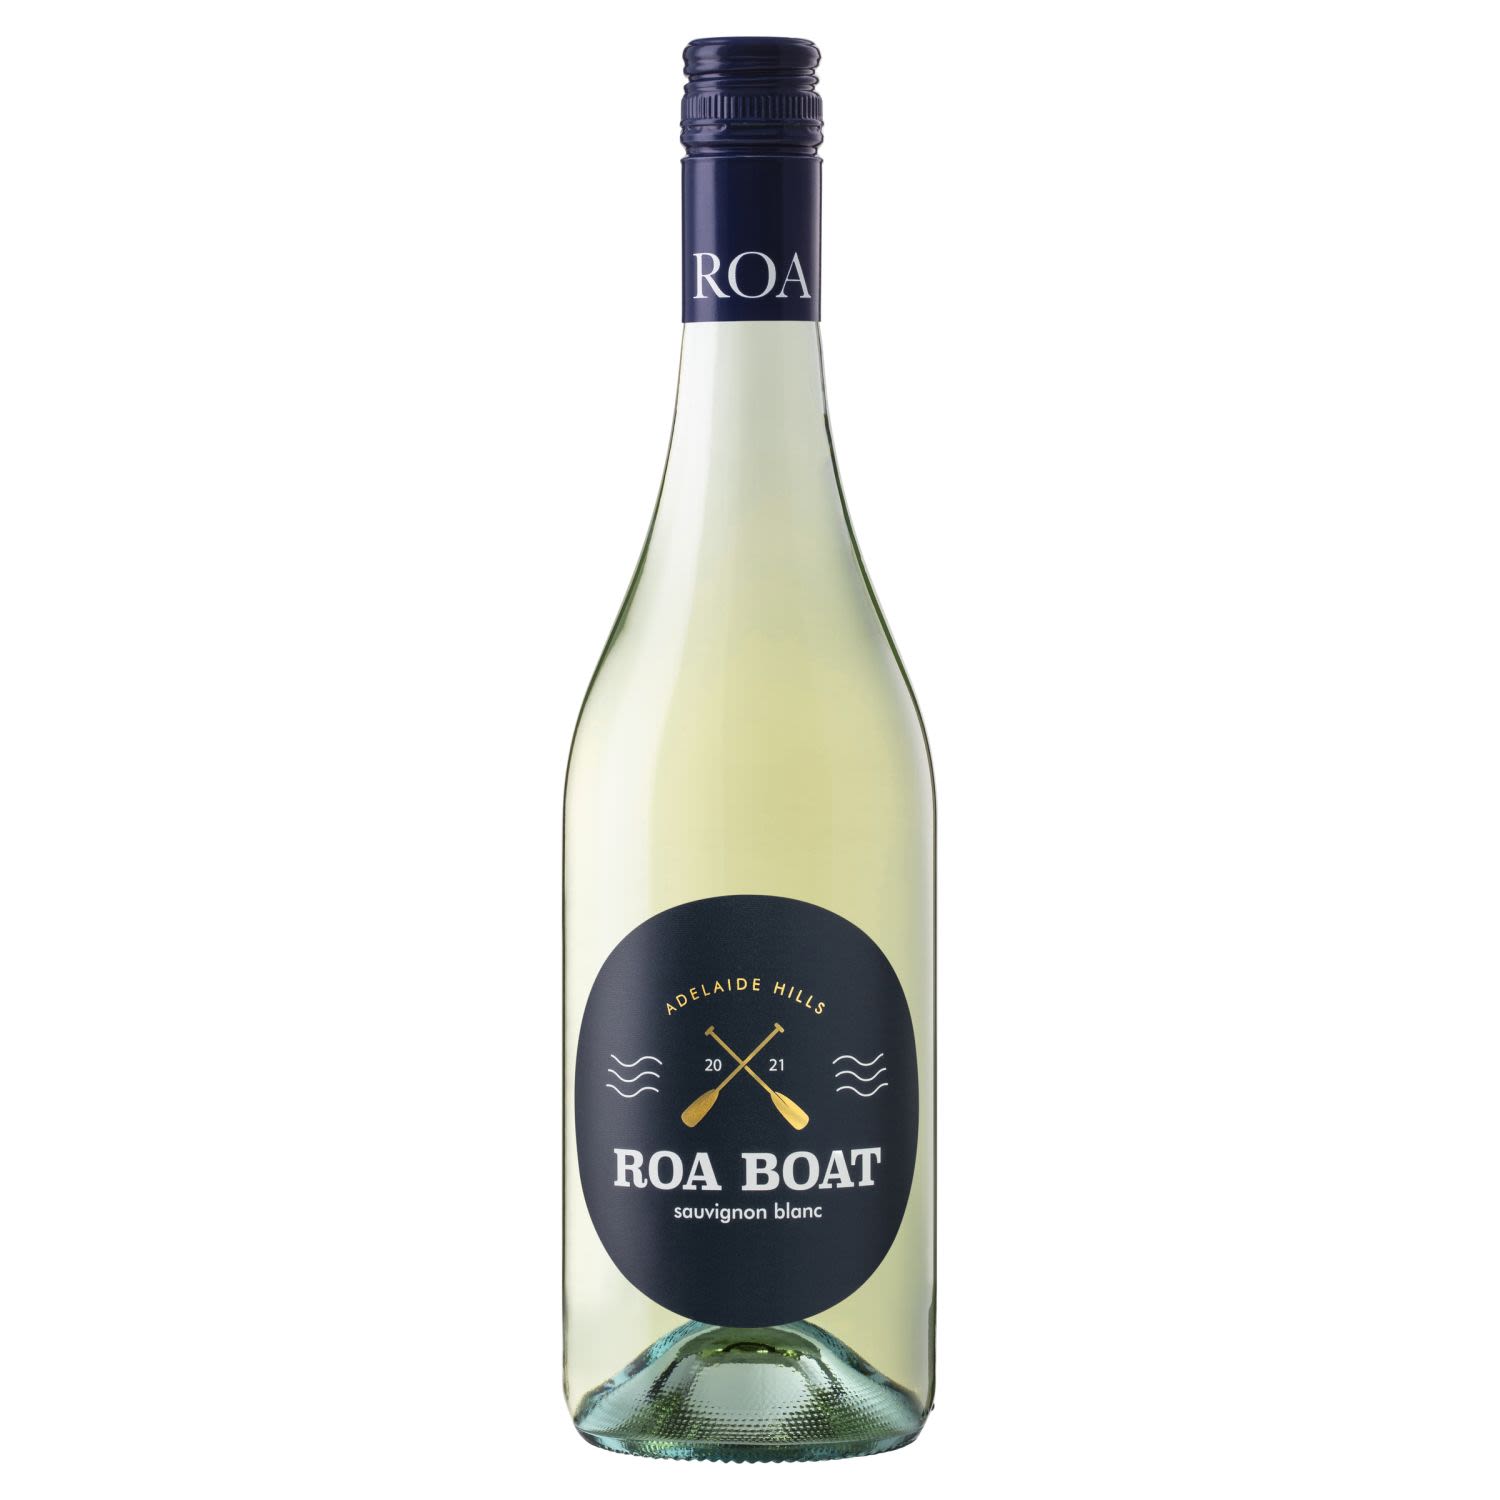 Roa Boat Sauvignon Blanc has a pale straw hue with mouth watering bursts of citrus and tropical fruits on the palate.<br /> <br />Alcohol Volume: 12.50%<br /><br />Pack Format: Bottle<br /><br />Standard Drinks: 7.4<br /><br />Pack Type: Bottle<br /><br />Country of Origin: Australia<br /><br />Region: Adelaide Hills<br /><br />Vintage: Vintages Vary<br />